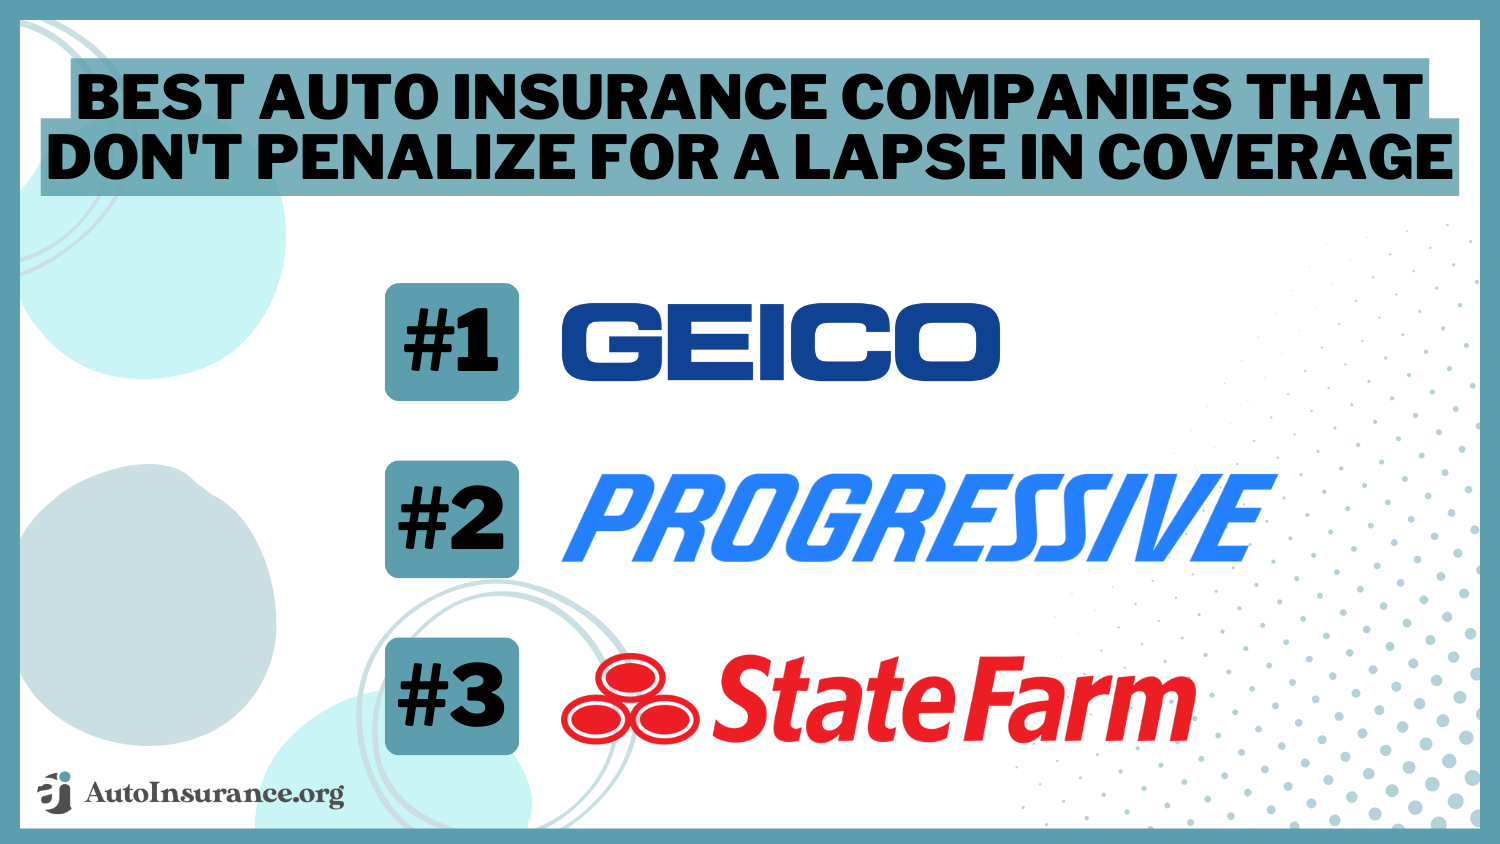 Best Auto Insurance Companies That Don't Penalize for a Lapse in Coverage: Geico, Progressive, State Farm